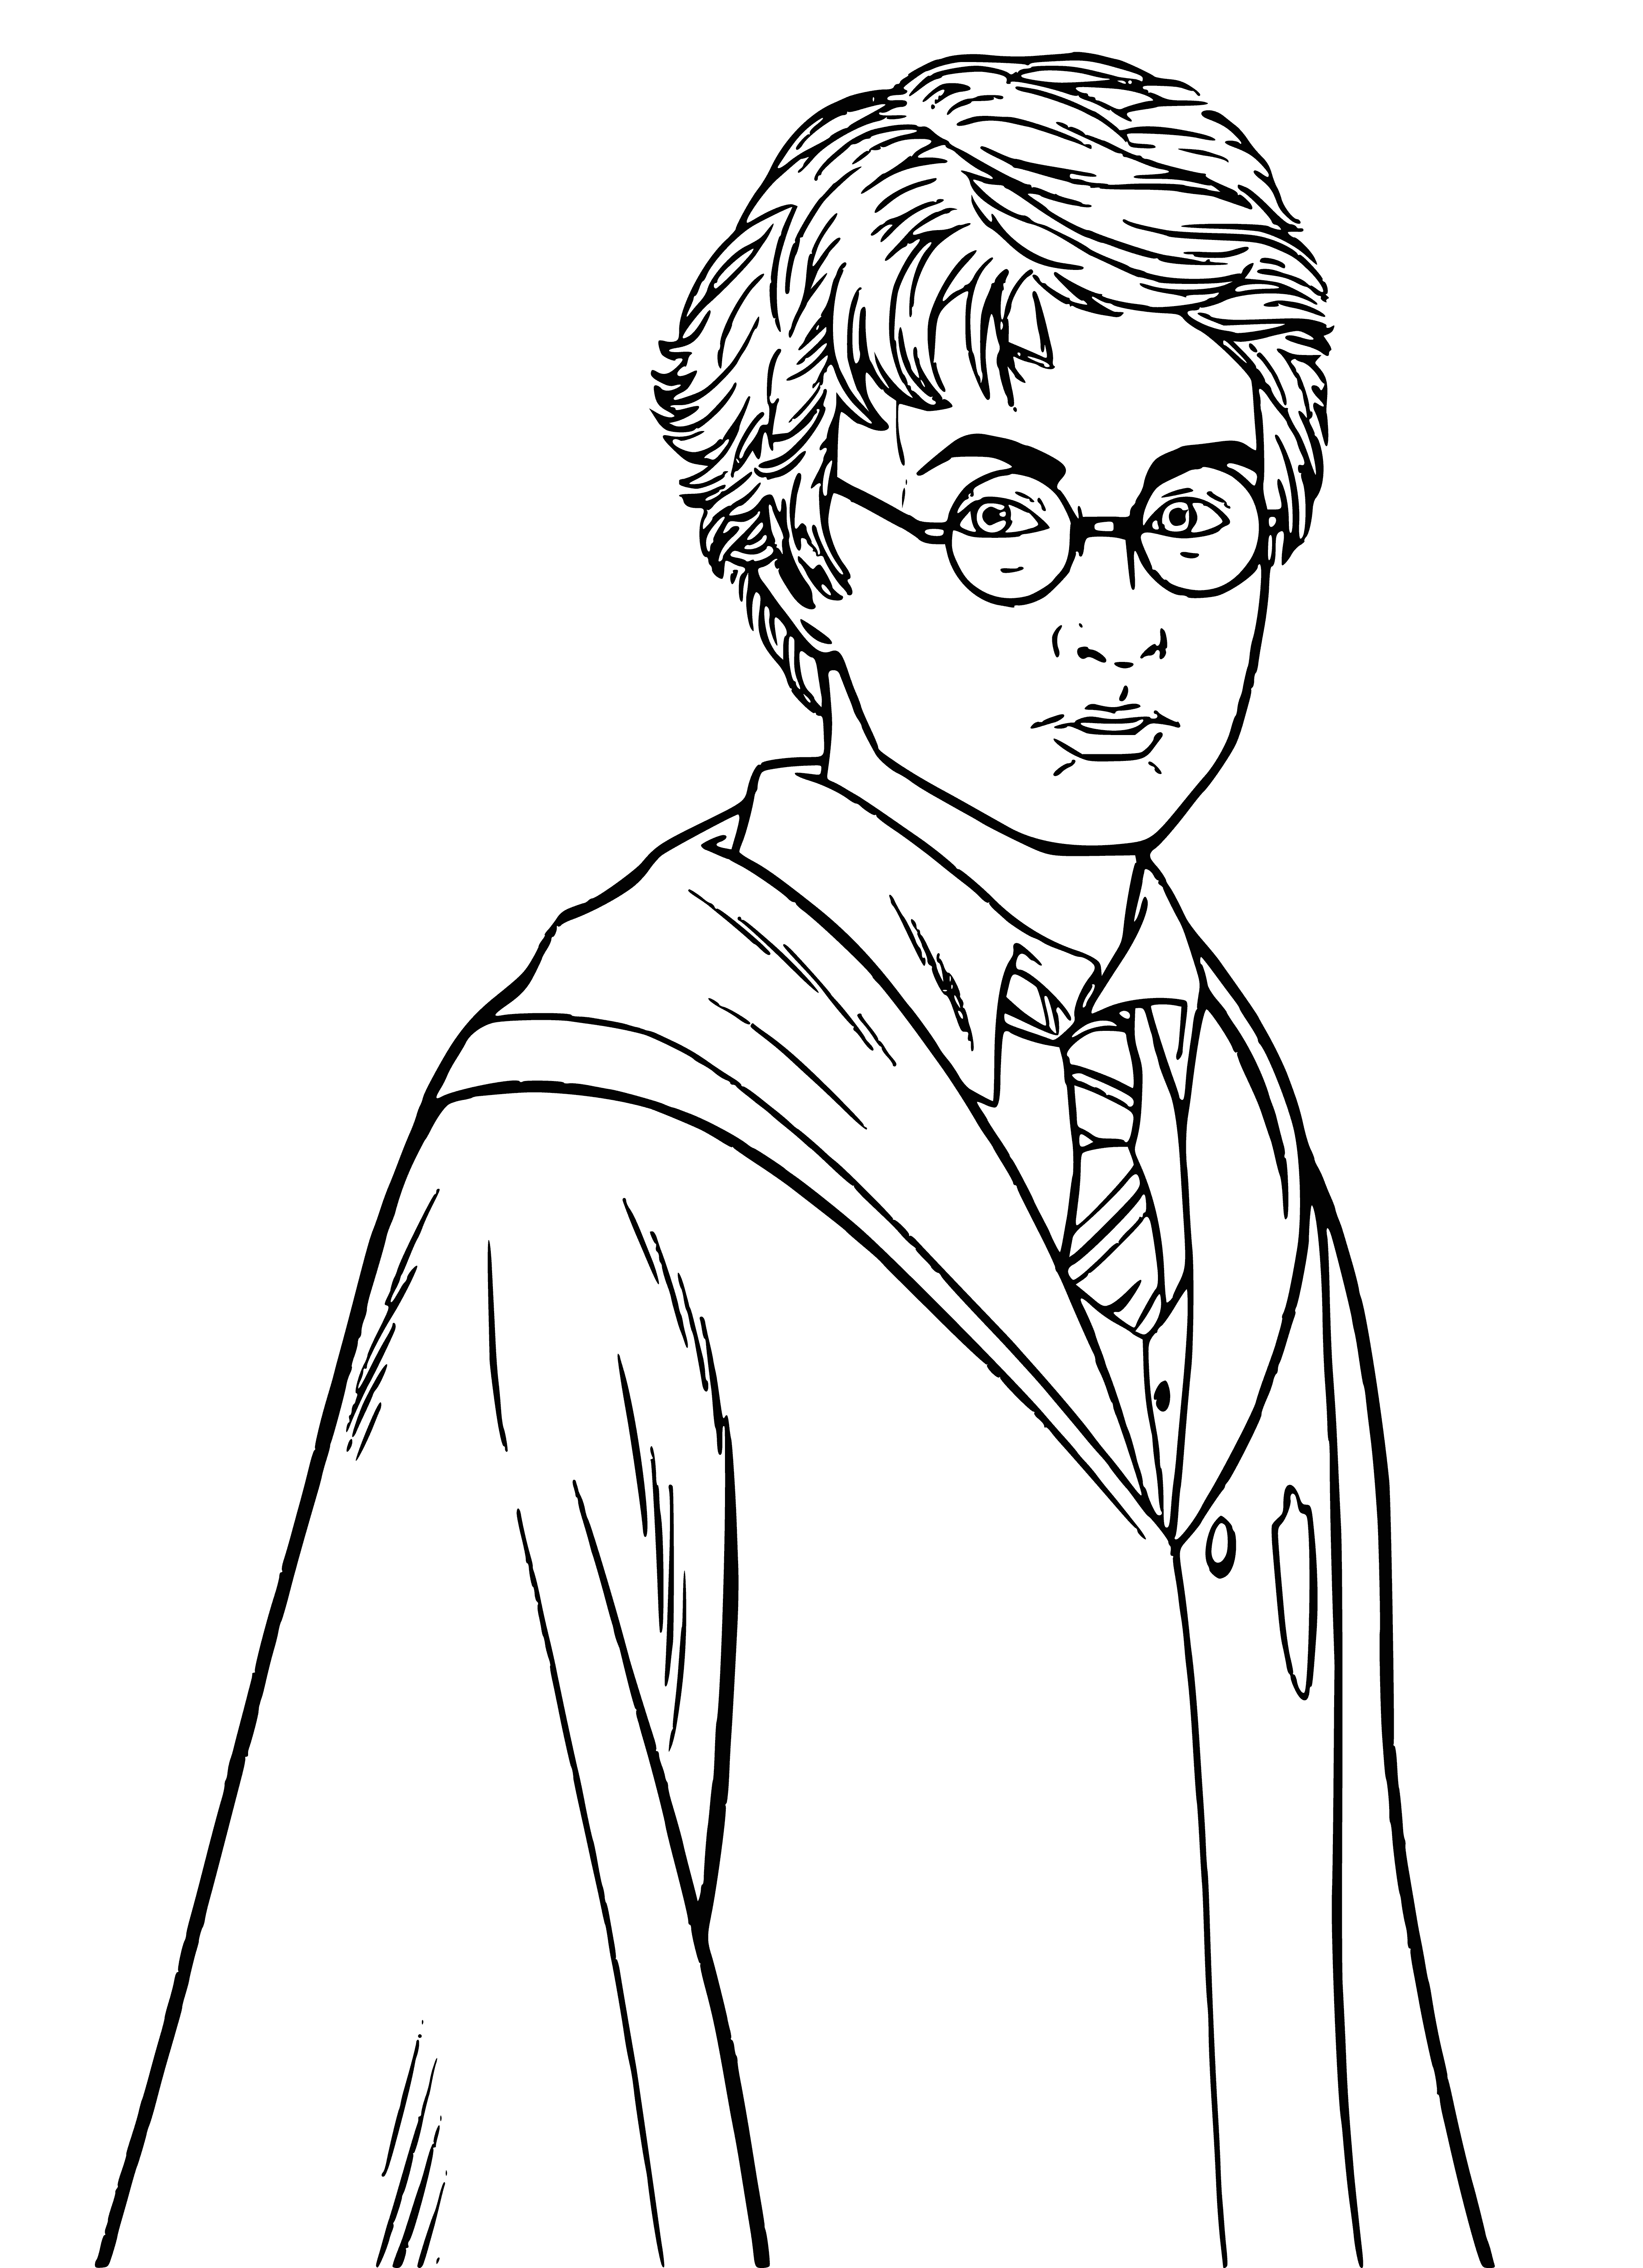 coloring page: A young wizard stands before a castle, wand raised, ready to take on the world. His unruly hair and lightning-shaped scar hint at tales of great adventure.